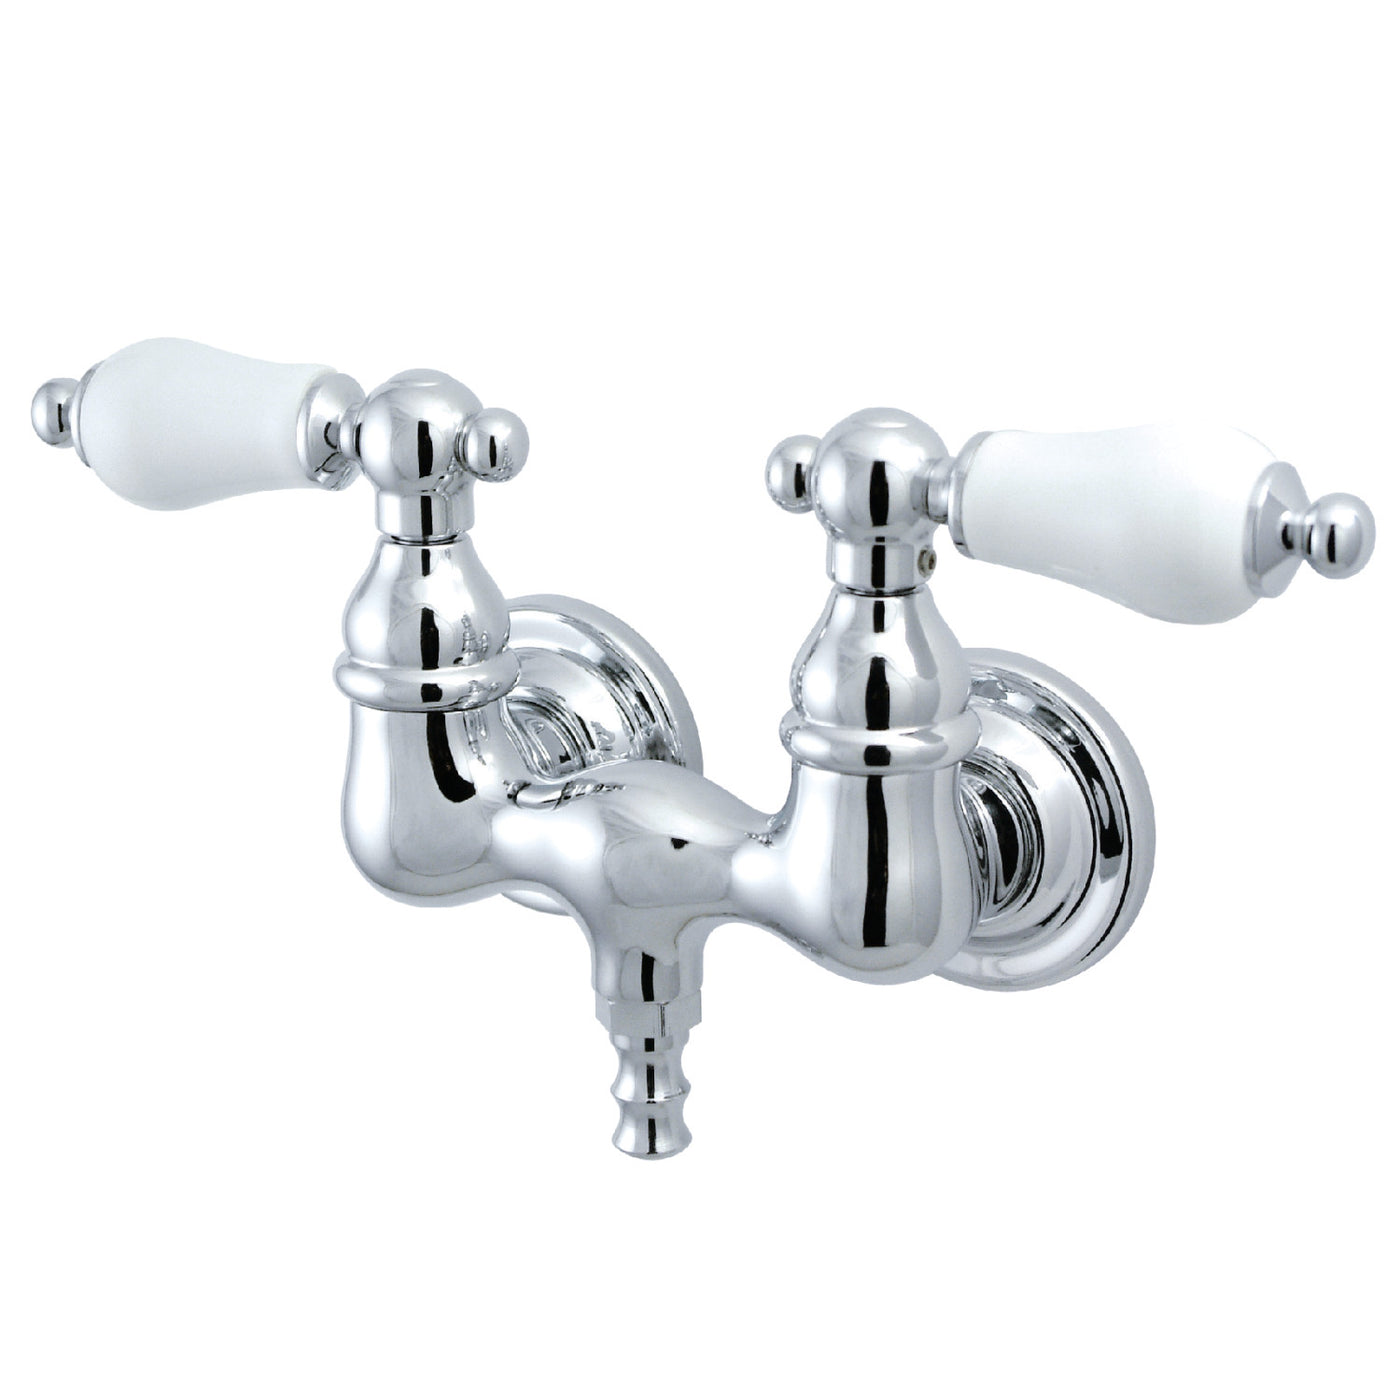 Elements of Design DT0321CL 3-3/8-Inch Wall Mount Tub Faucet, Polished Chrome